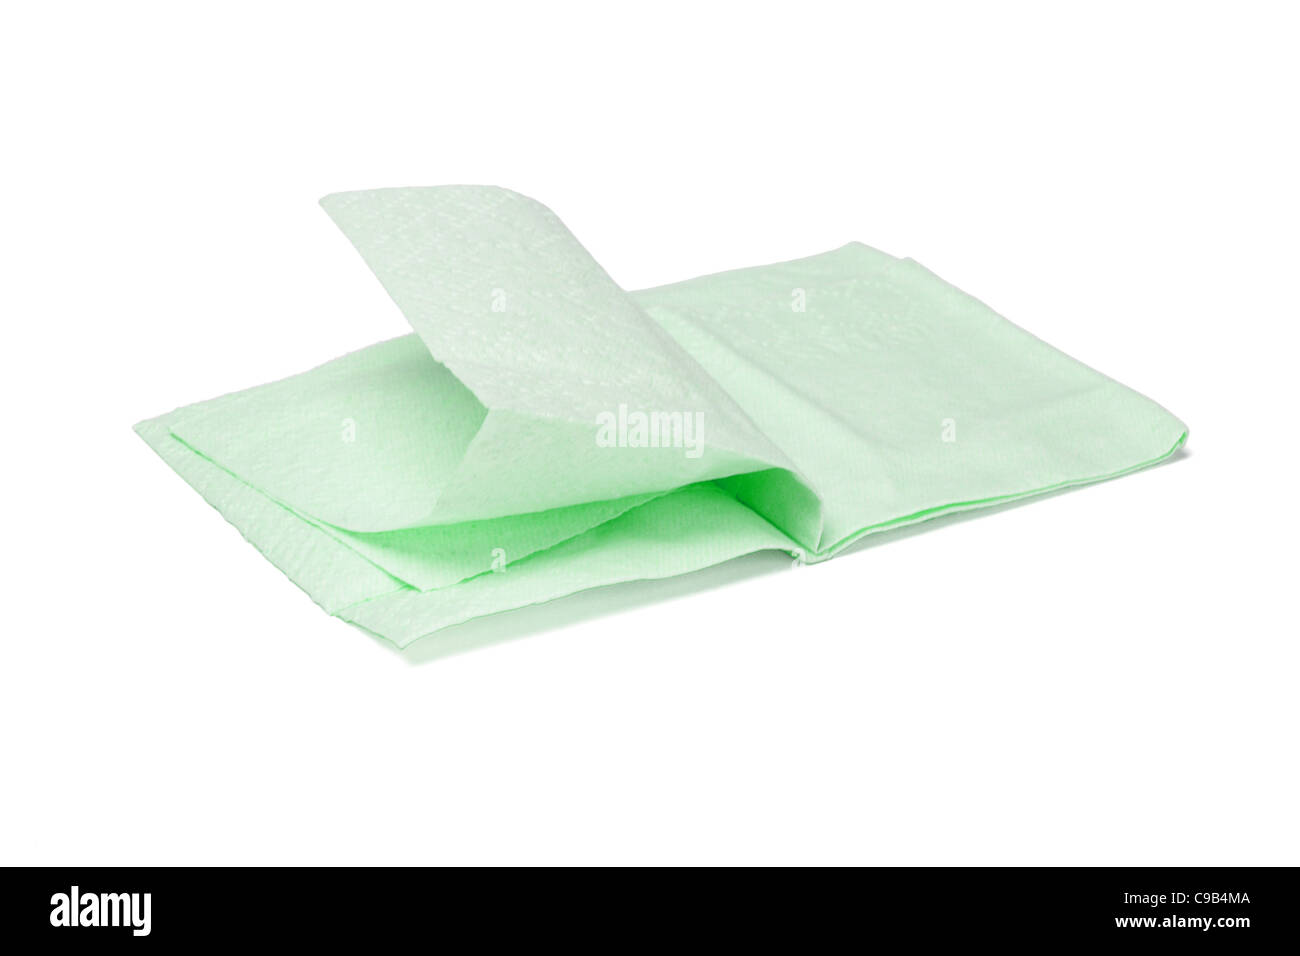 Green folded facial tissue paper on white background Stock Photo